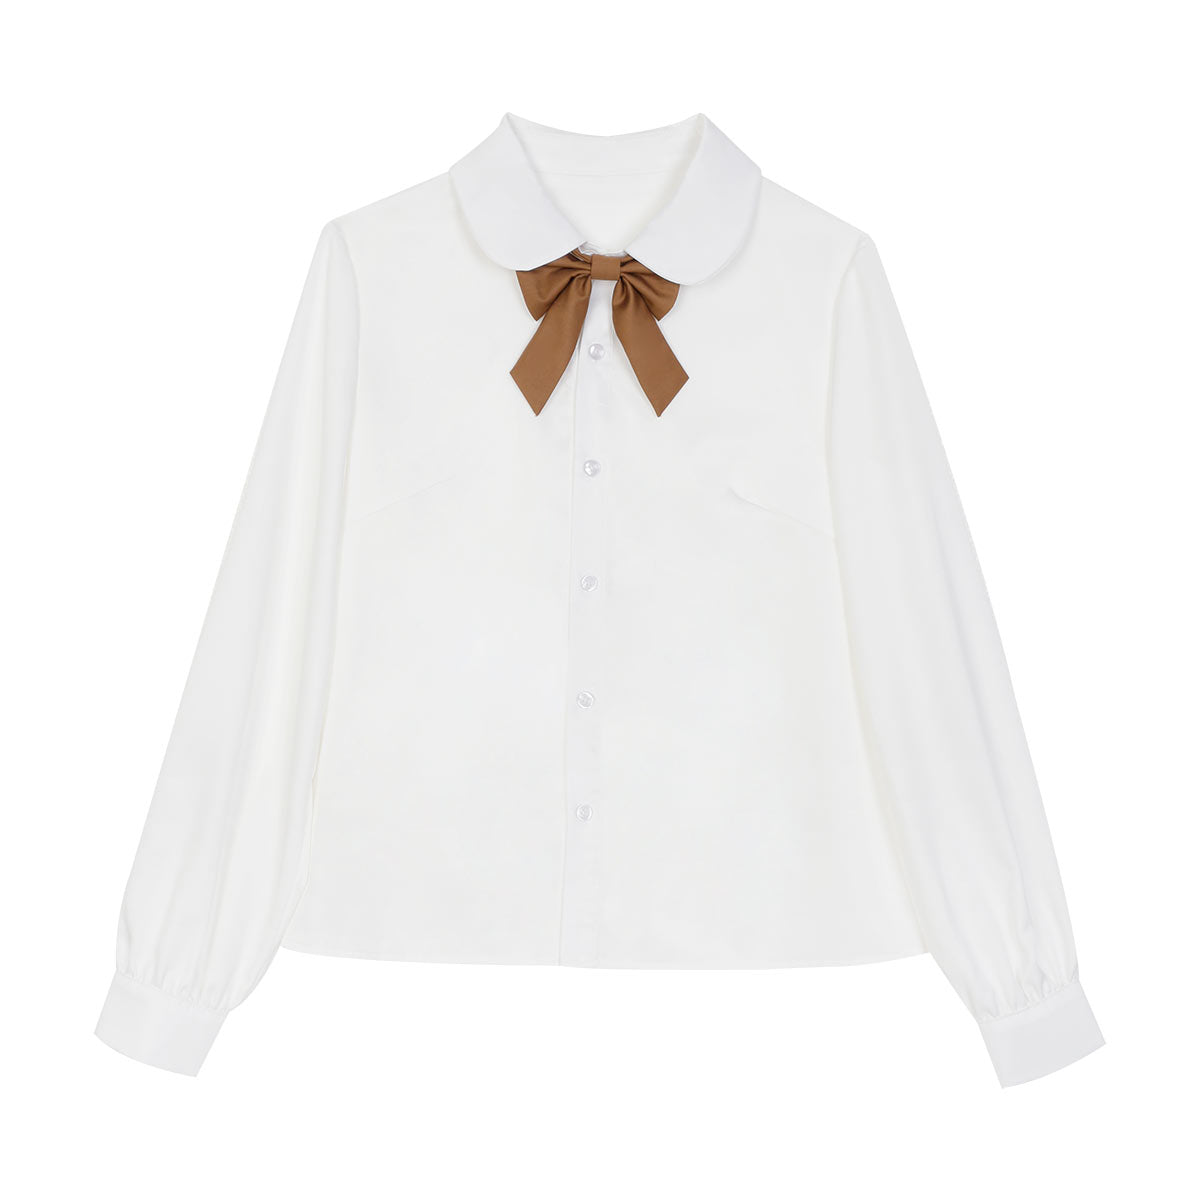 Begonia embroidery uniform style setup with ribbon tie